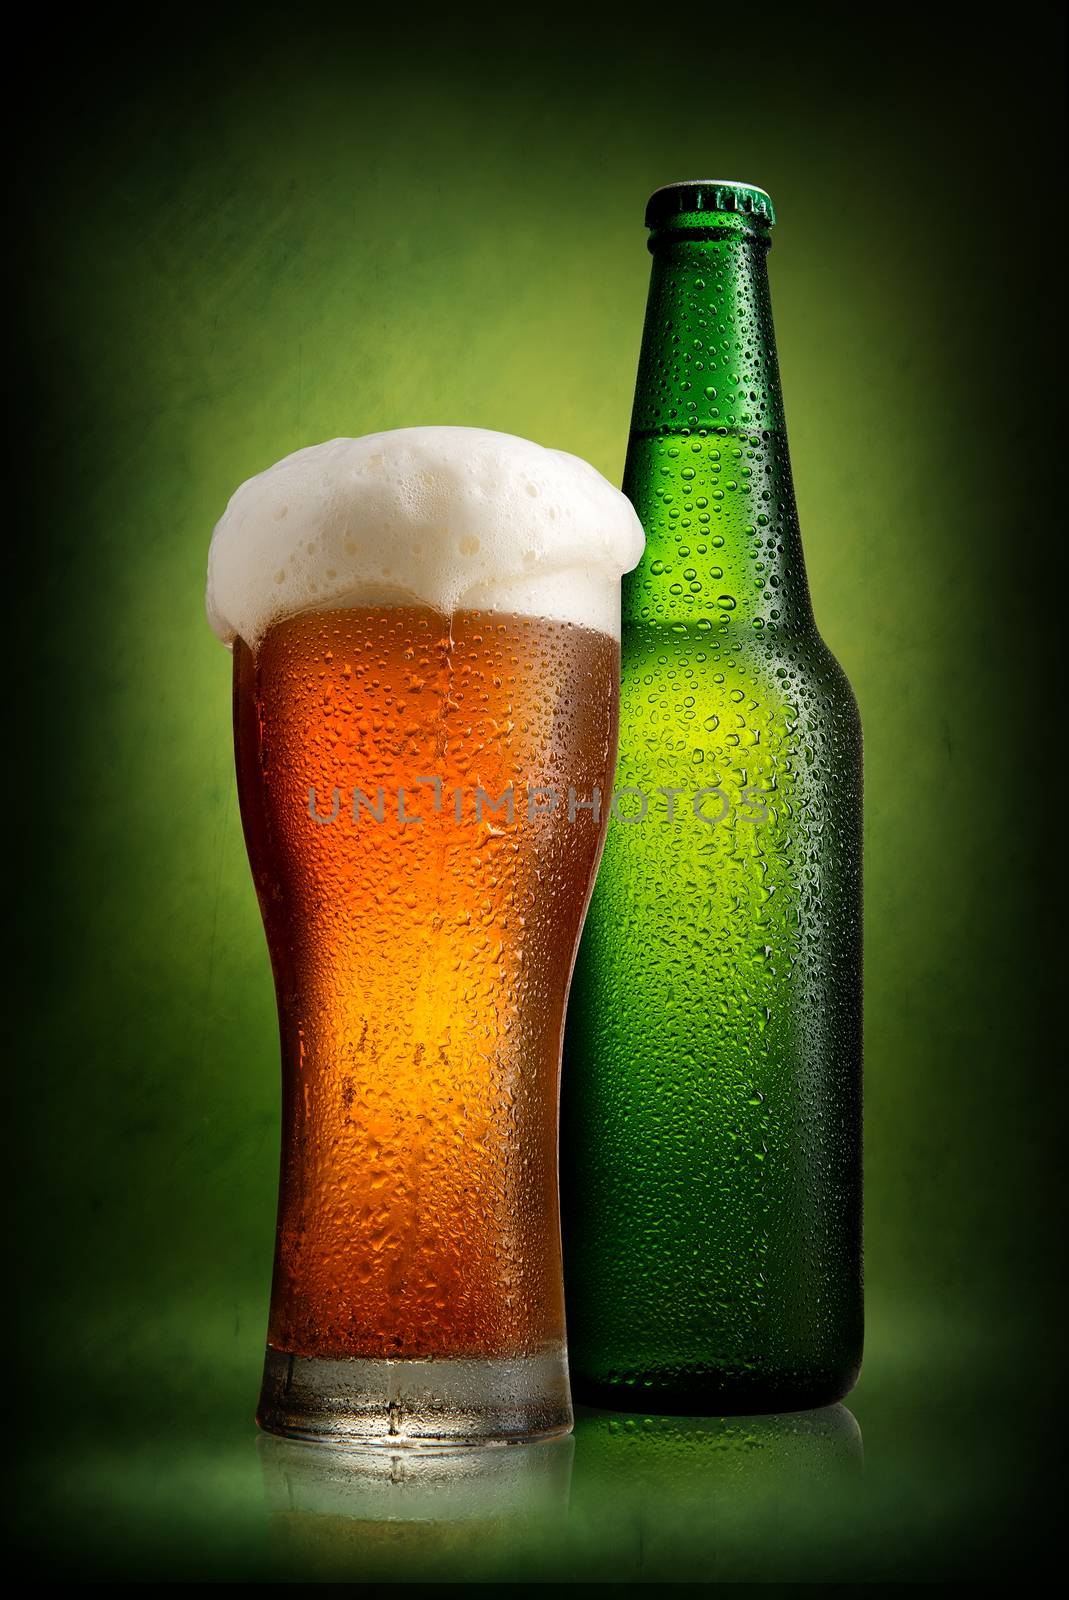 Beer in bottle and tall glass on a green background